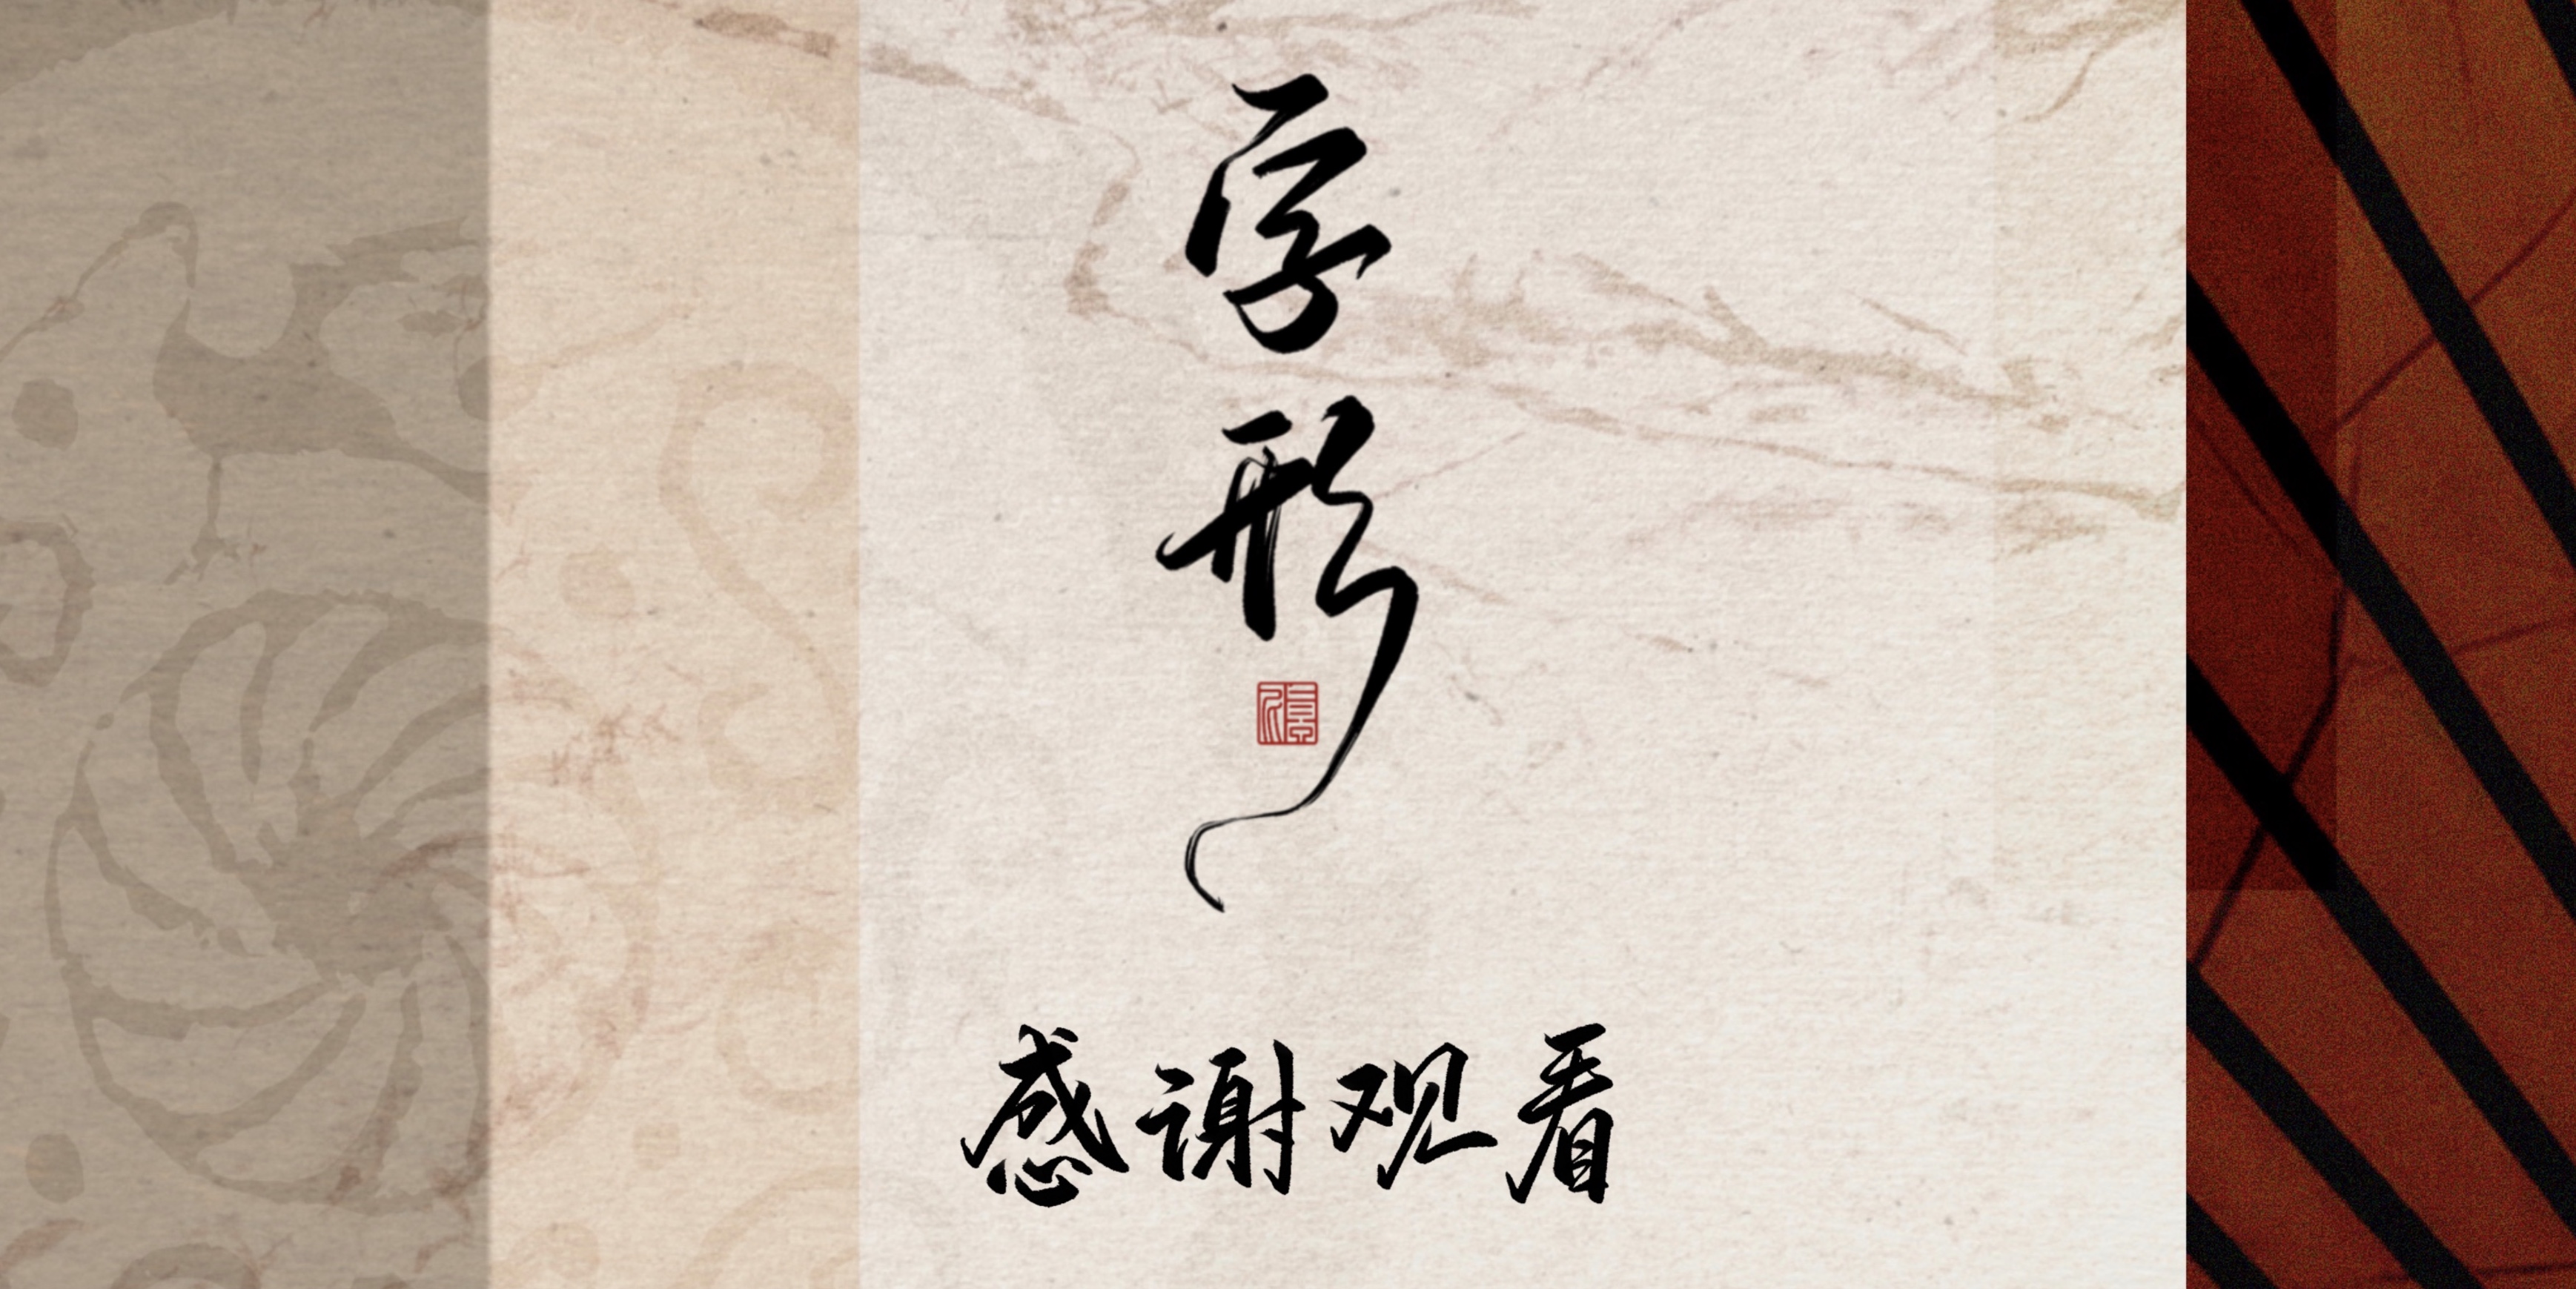 Interesting Chinese Creative Font Design-The Collision between Elegant Classical Chinese and Modern Chinese